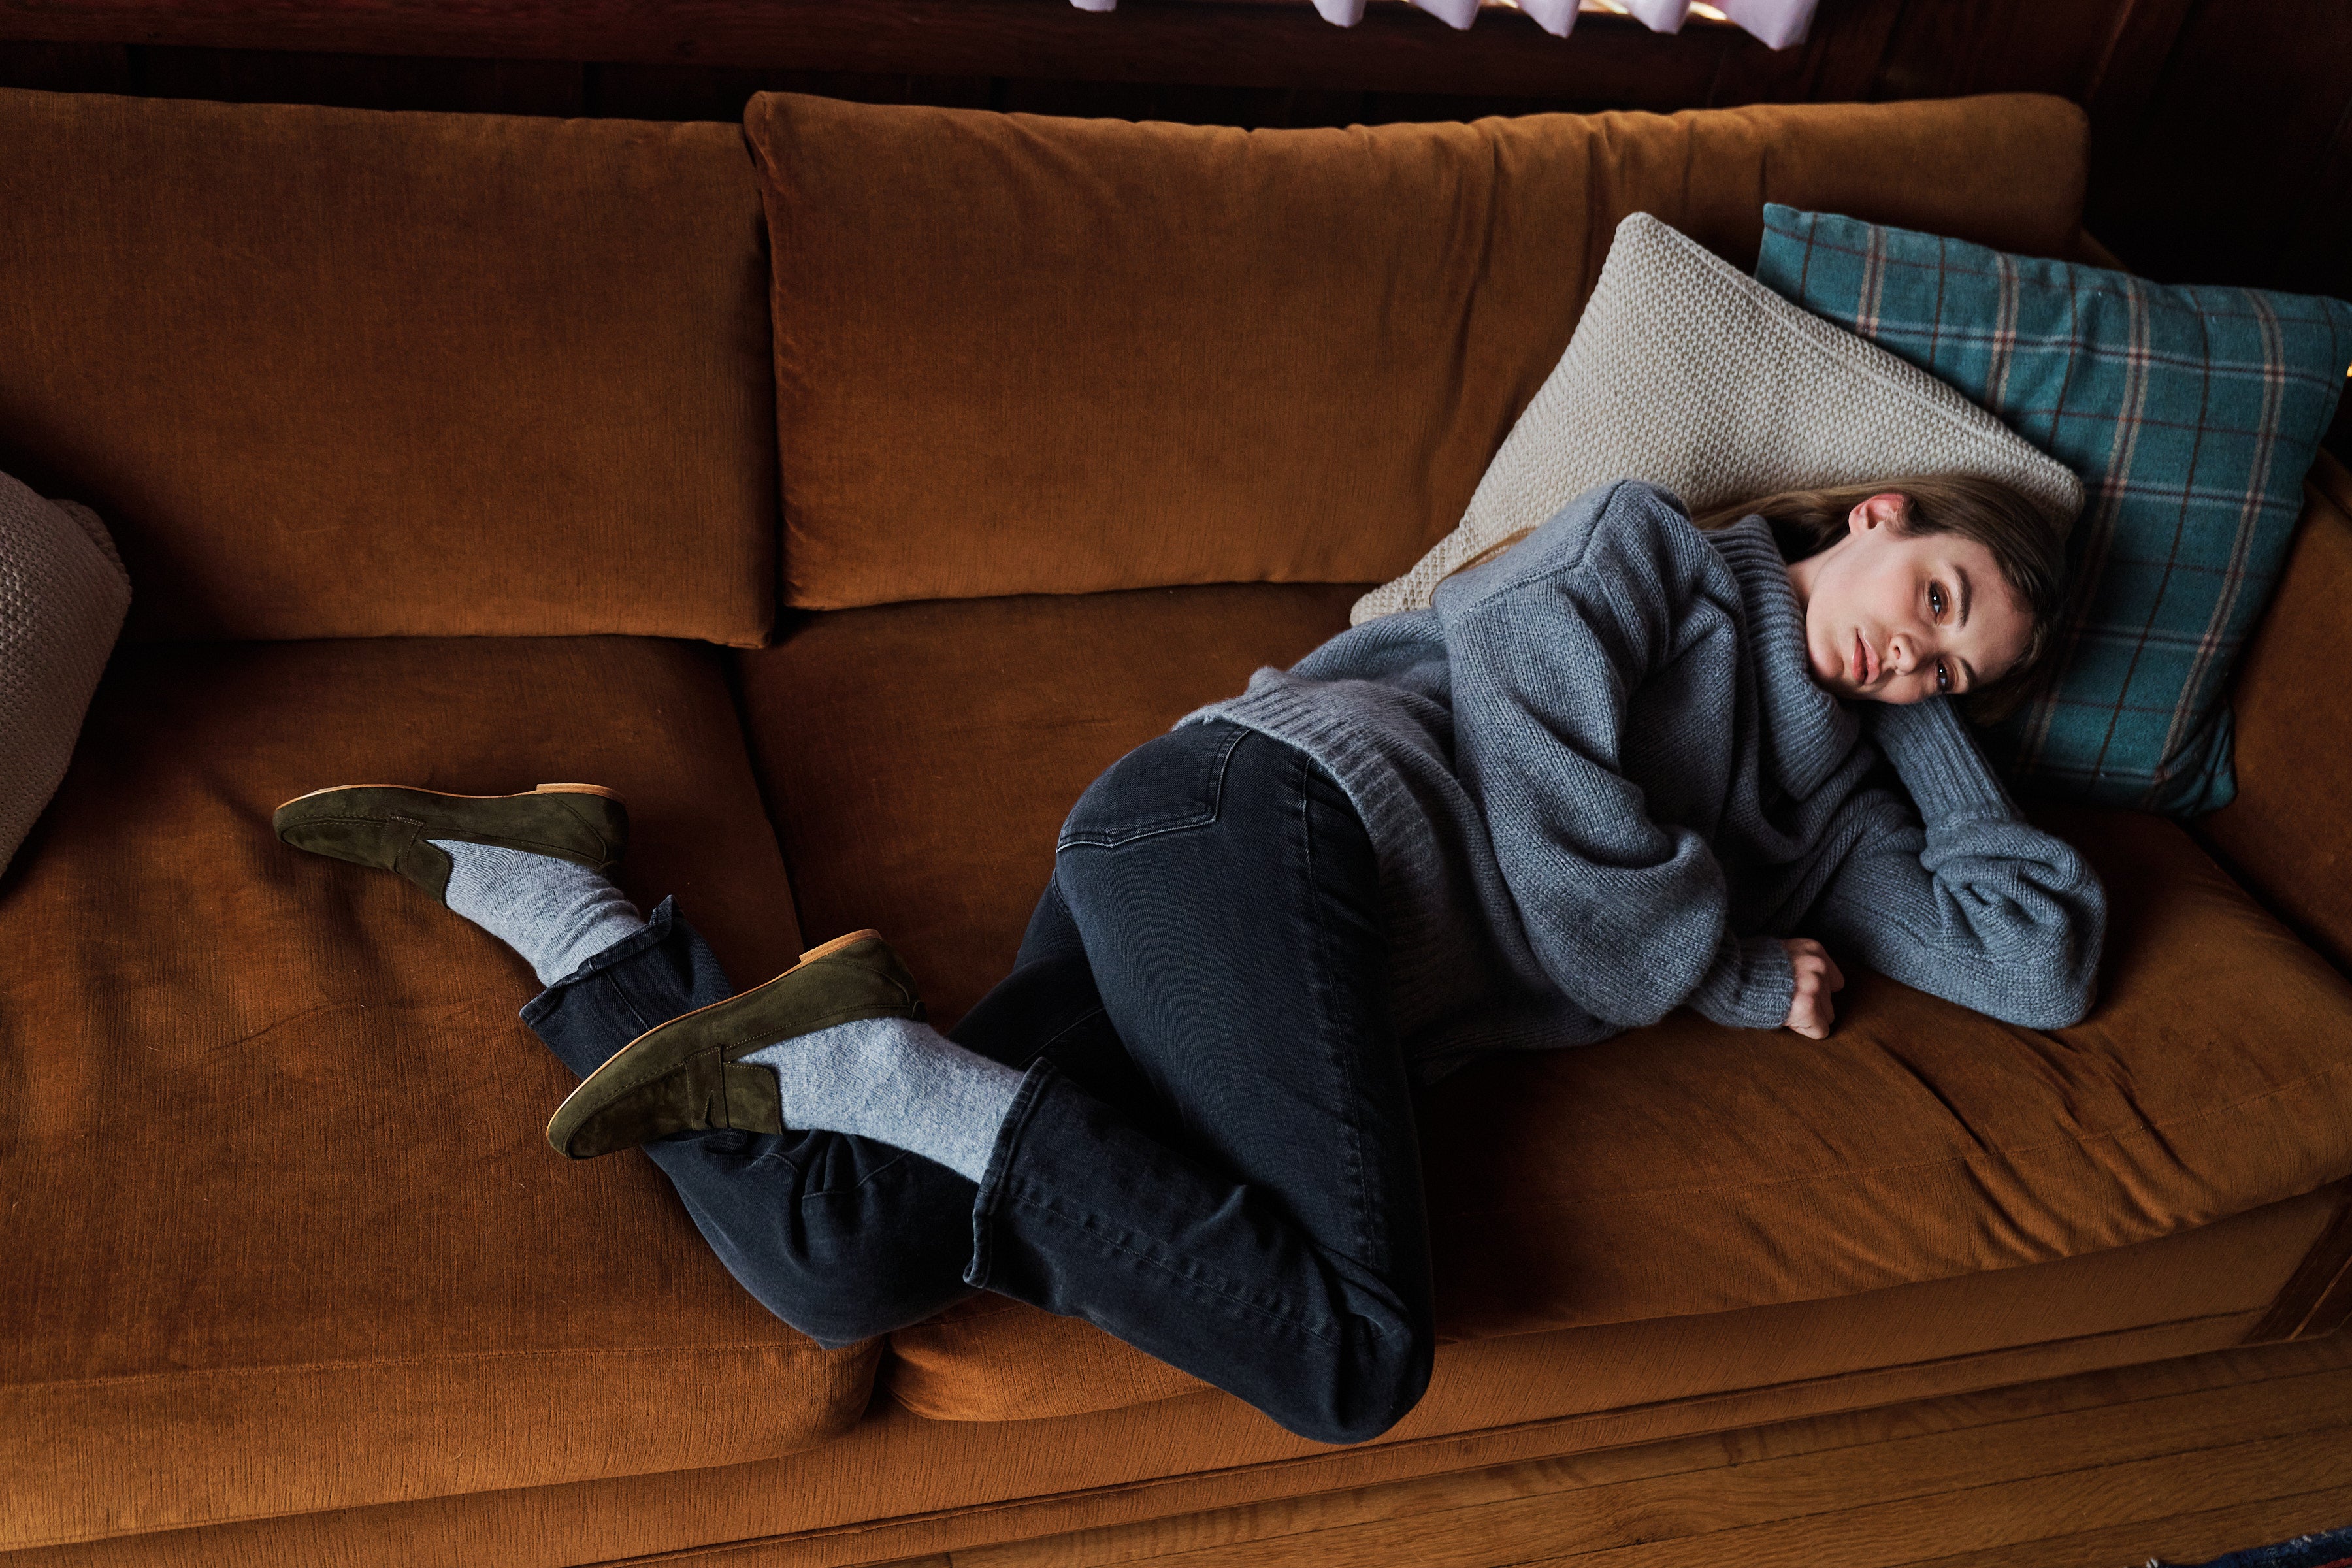 Woman laying on couch, side view of olive suede loafers